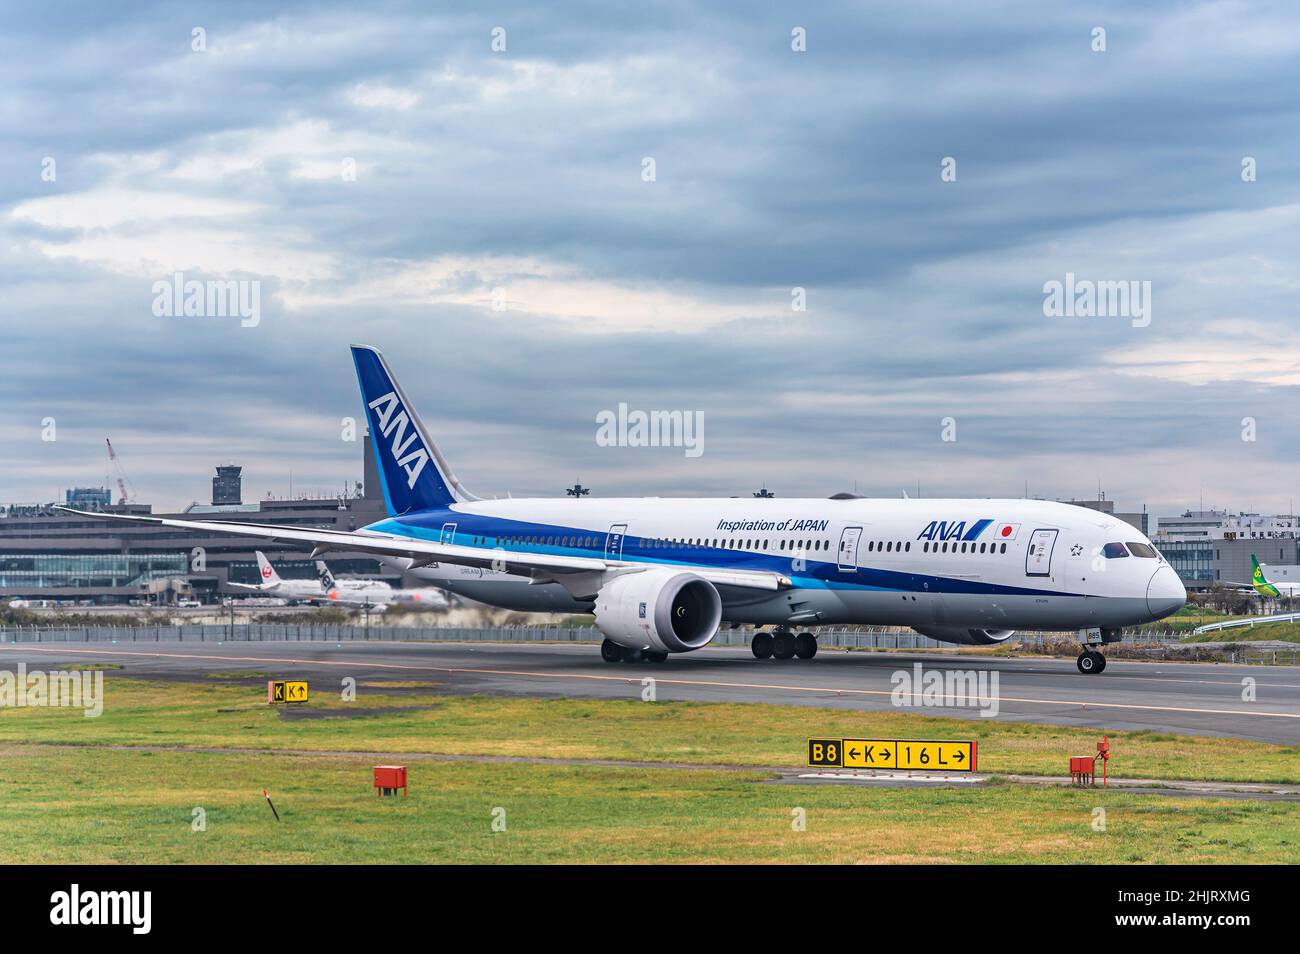 tokyo, japan - december 06 2021: Airbus or Boeing plane from Japanese national carrier airline All Nippon Airways alias ANA moving forward on the apro Stock Photo